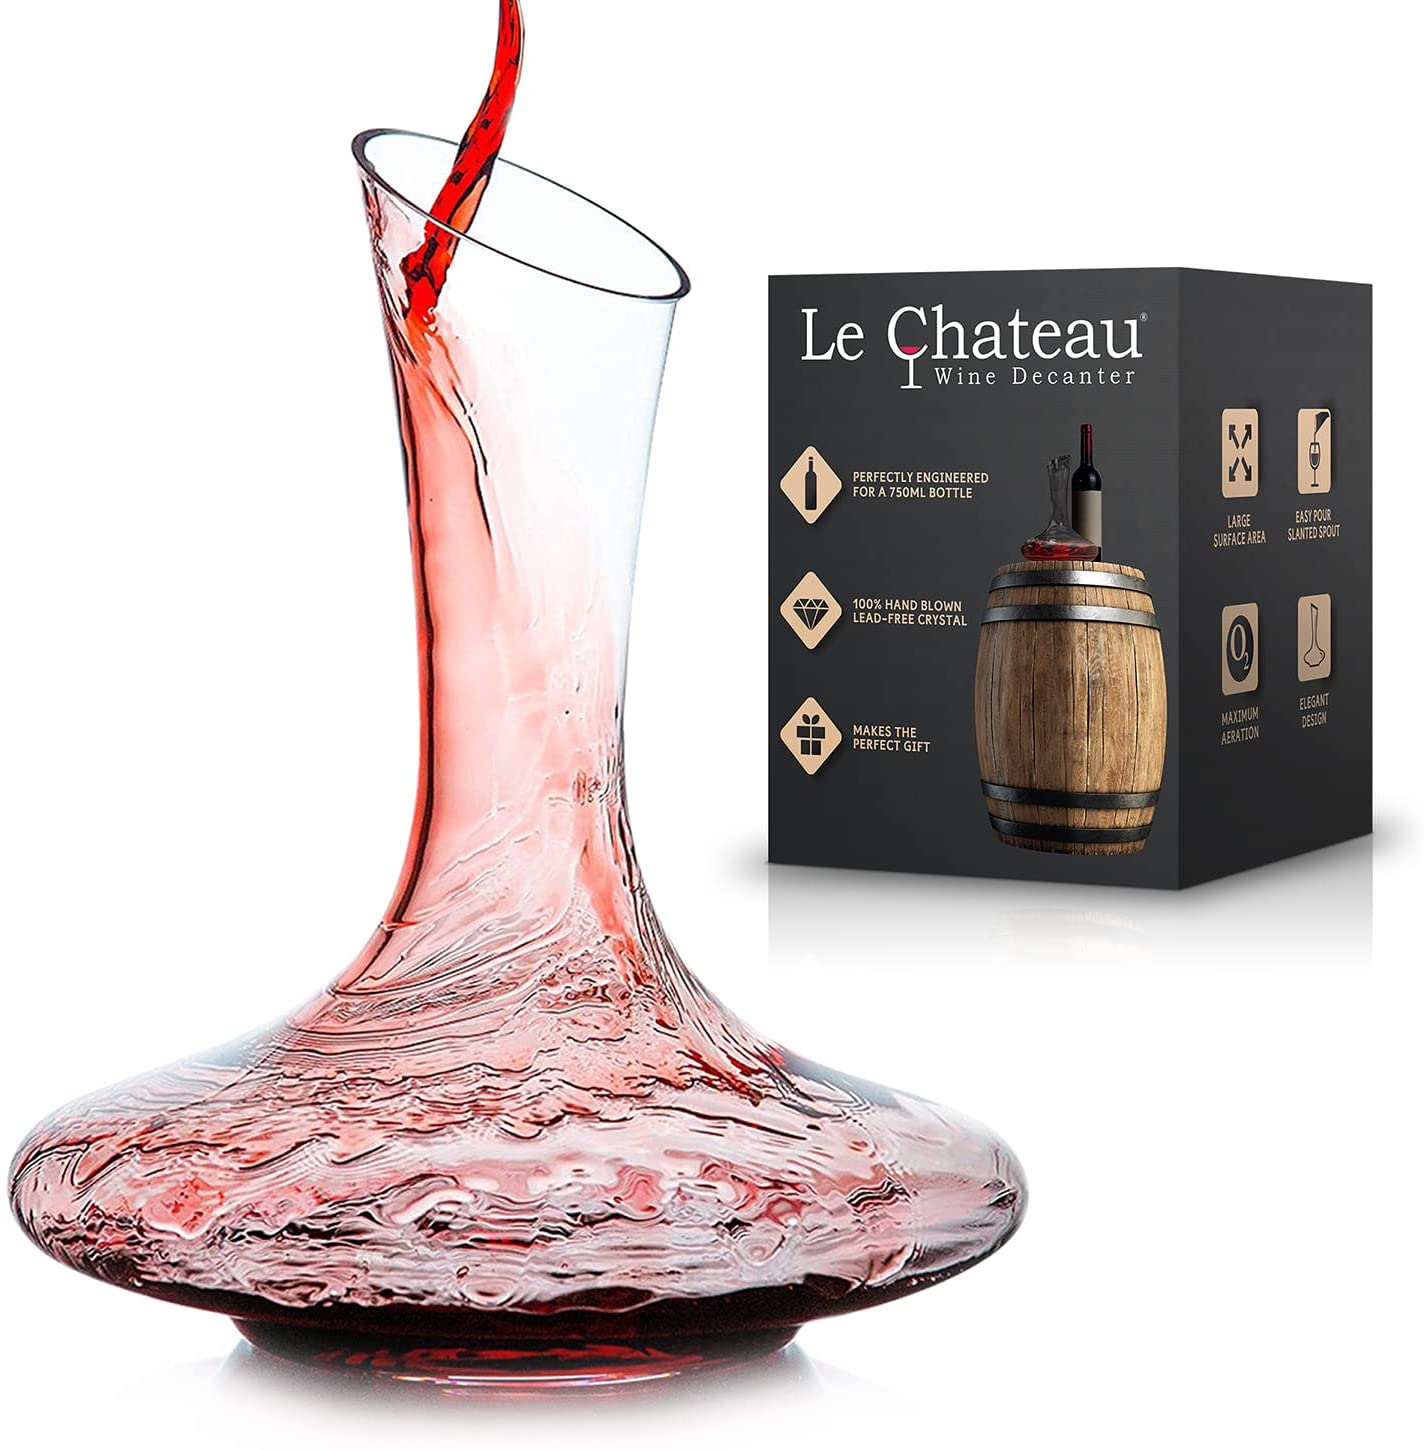 Le Chateau Wine Decanter Best 15 Valentine's Day Gift Ideas for Husband - 12